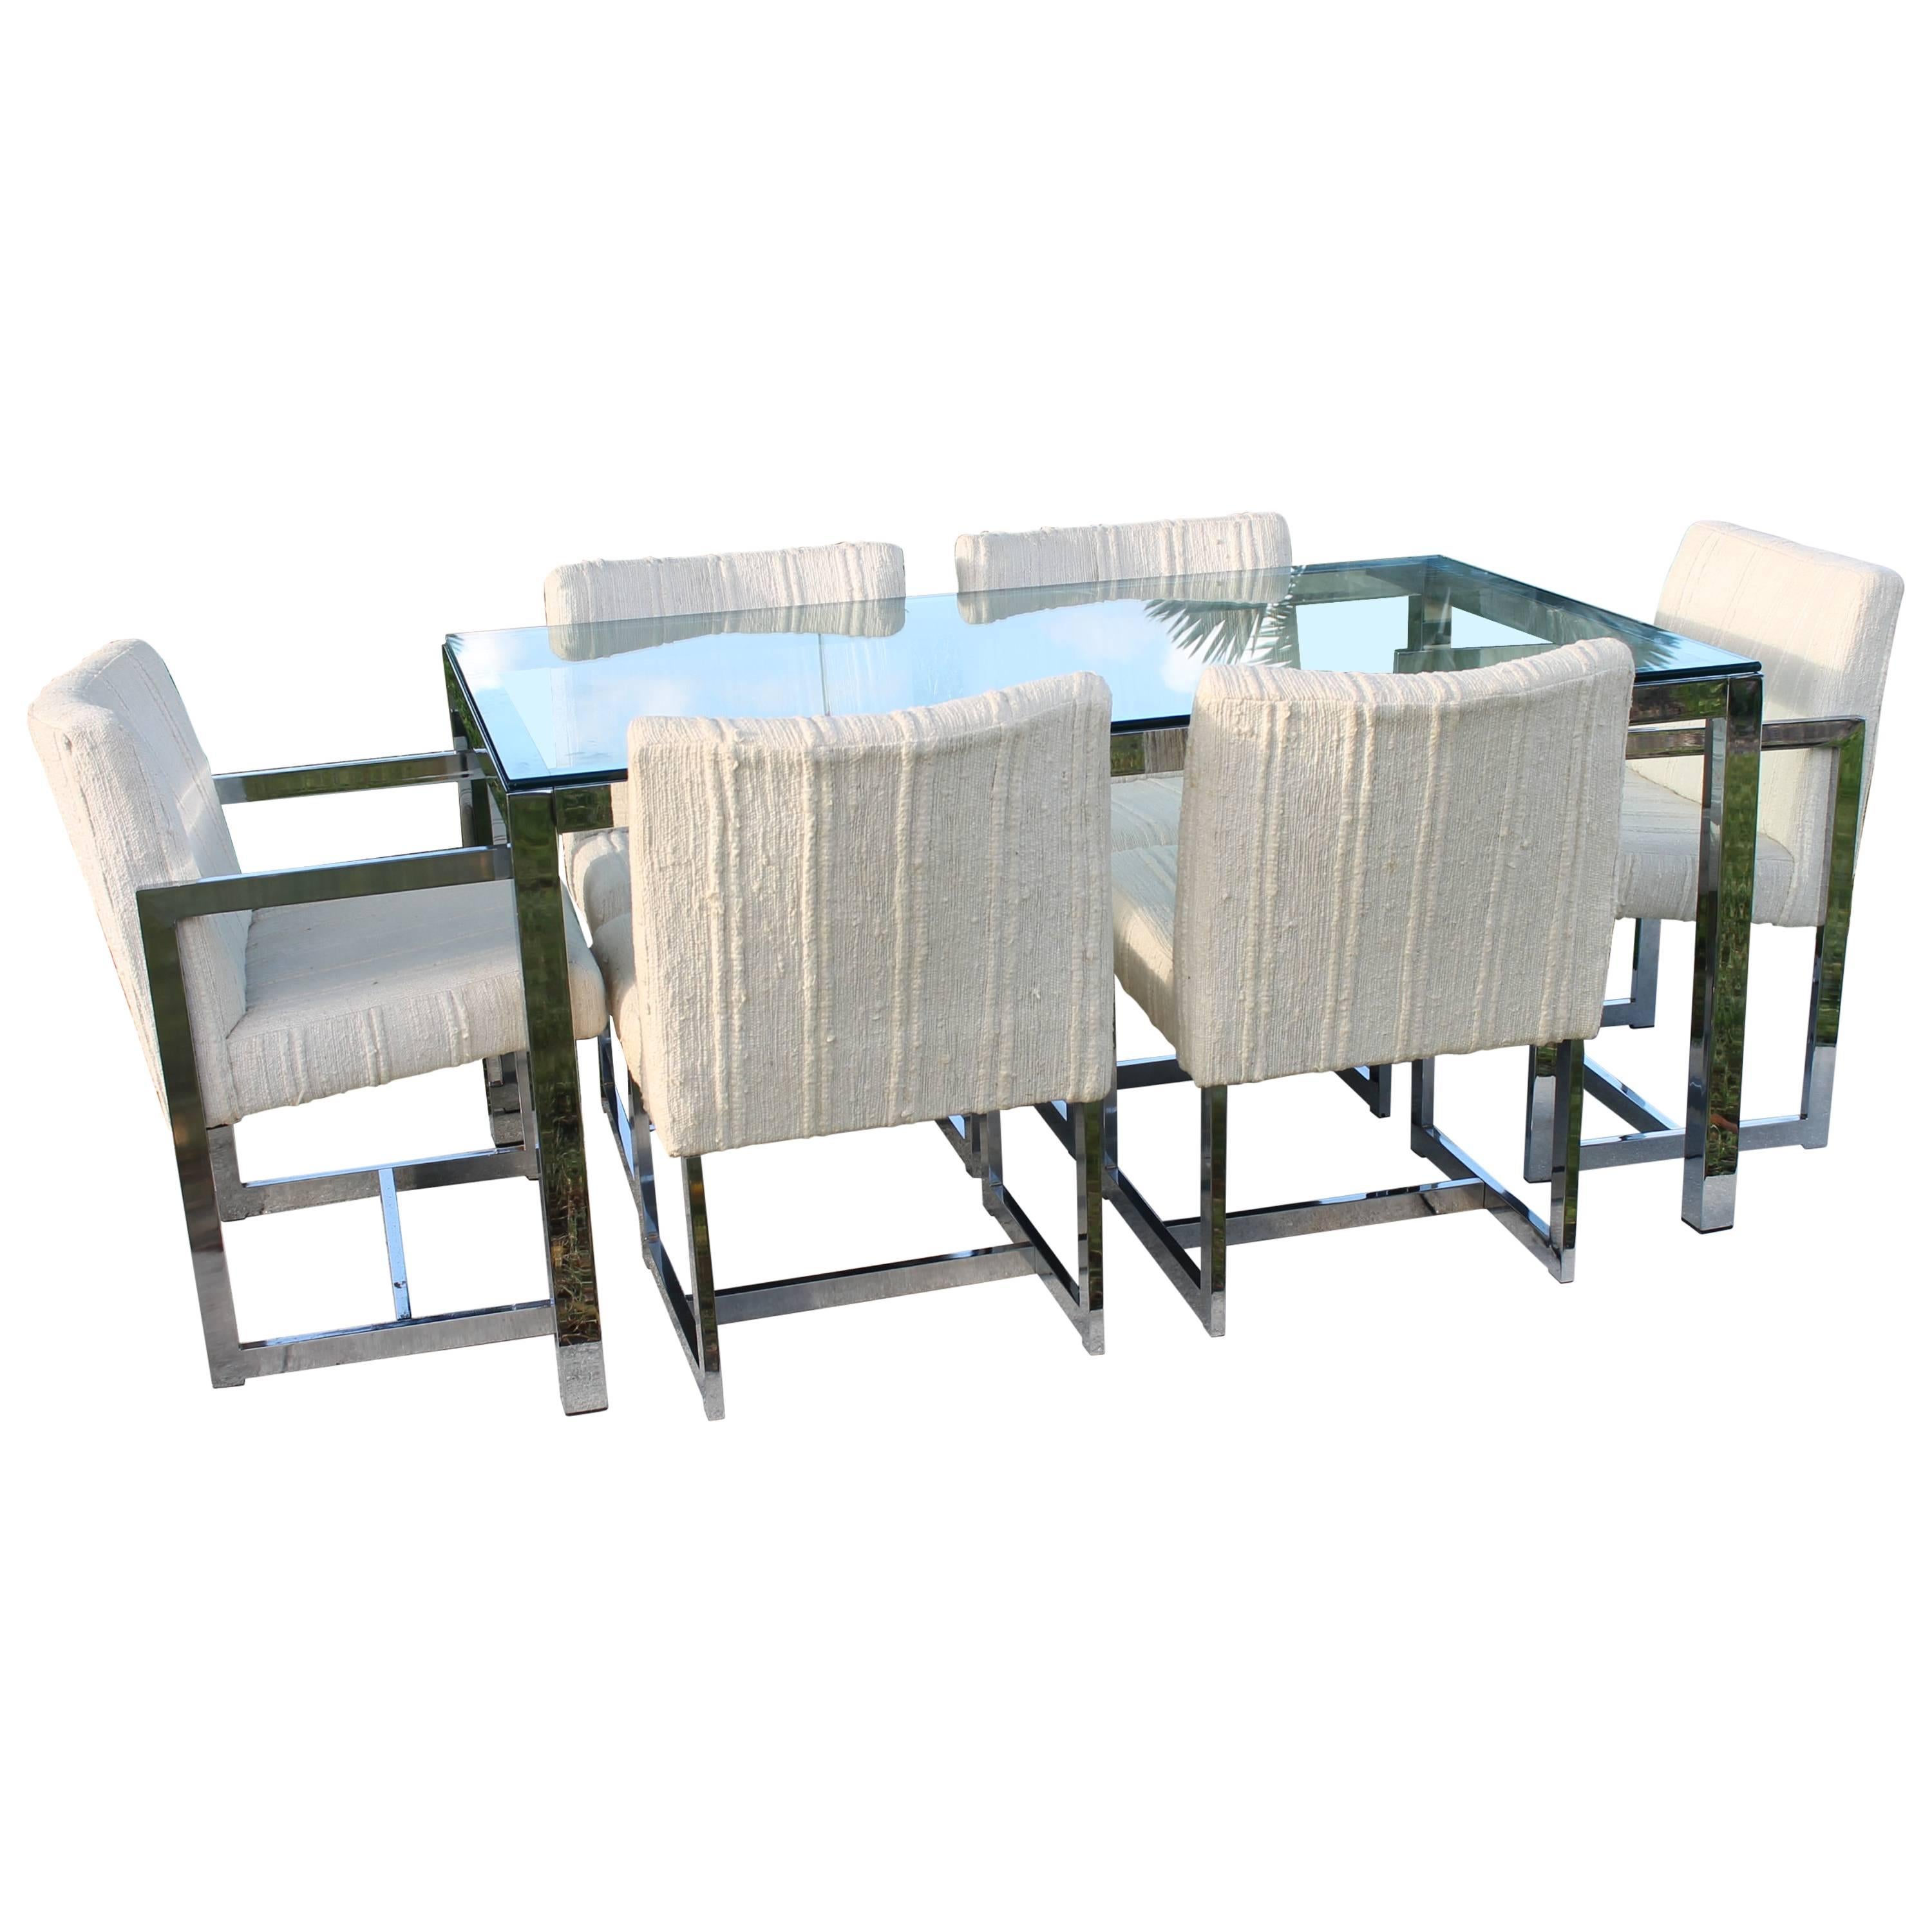 Midcentury Chrome Table and Six Chairs Dining Set by Milo Baughman for DIA